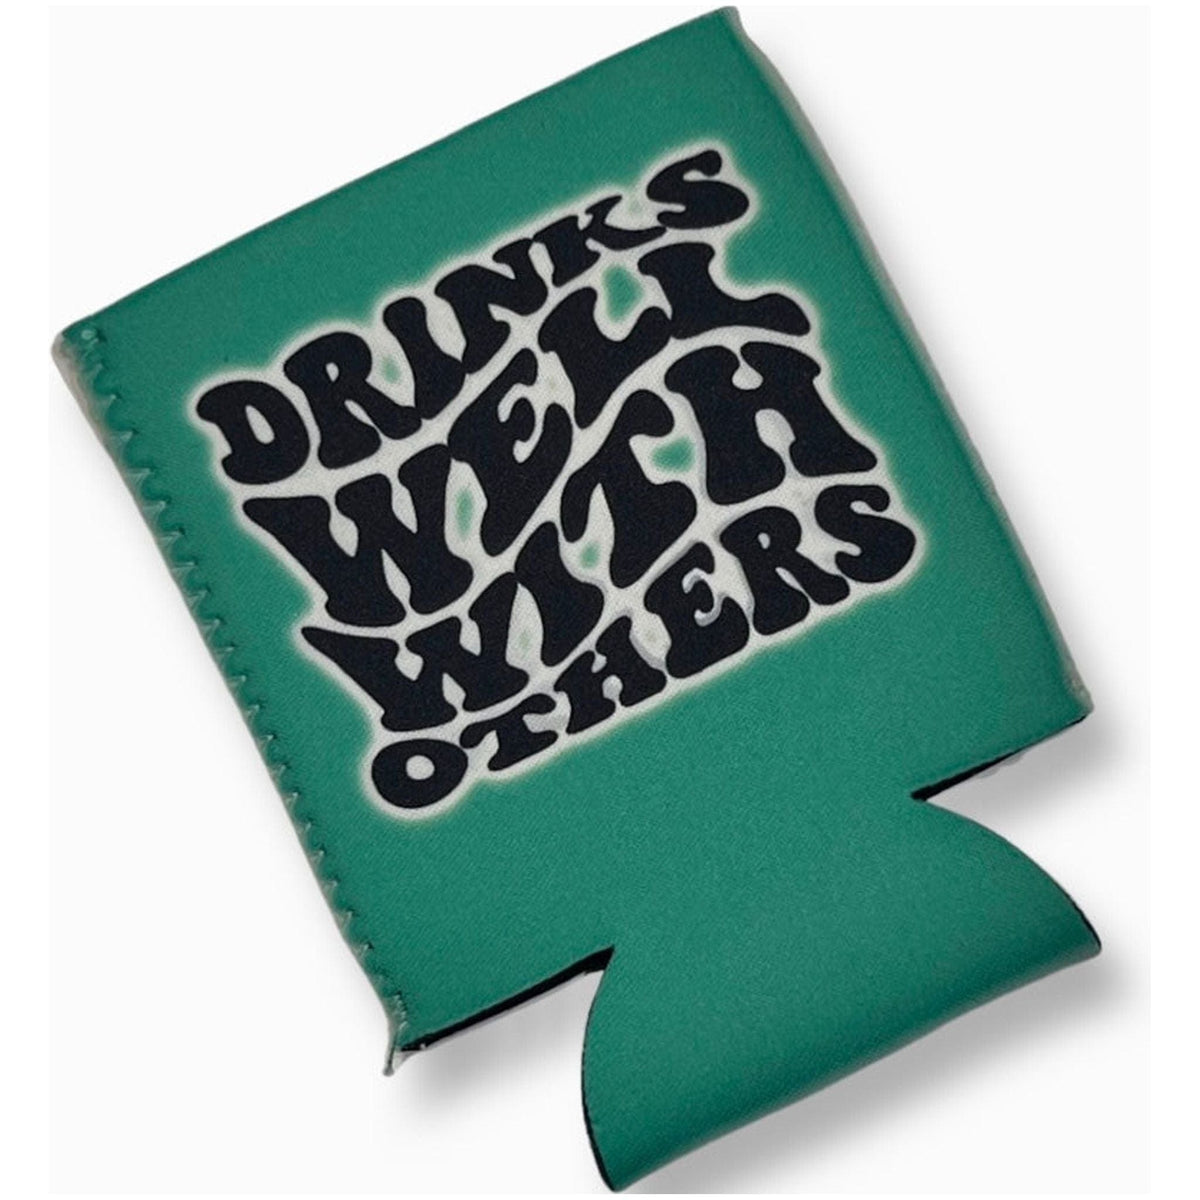 Drinks Well With Others - Koozie TheFringeCultureCollective